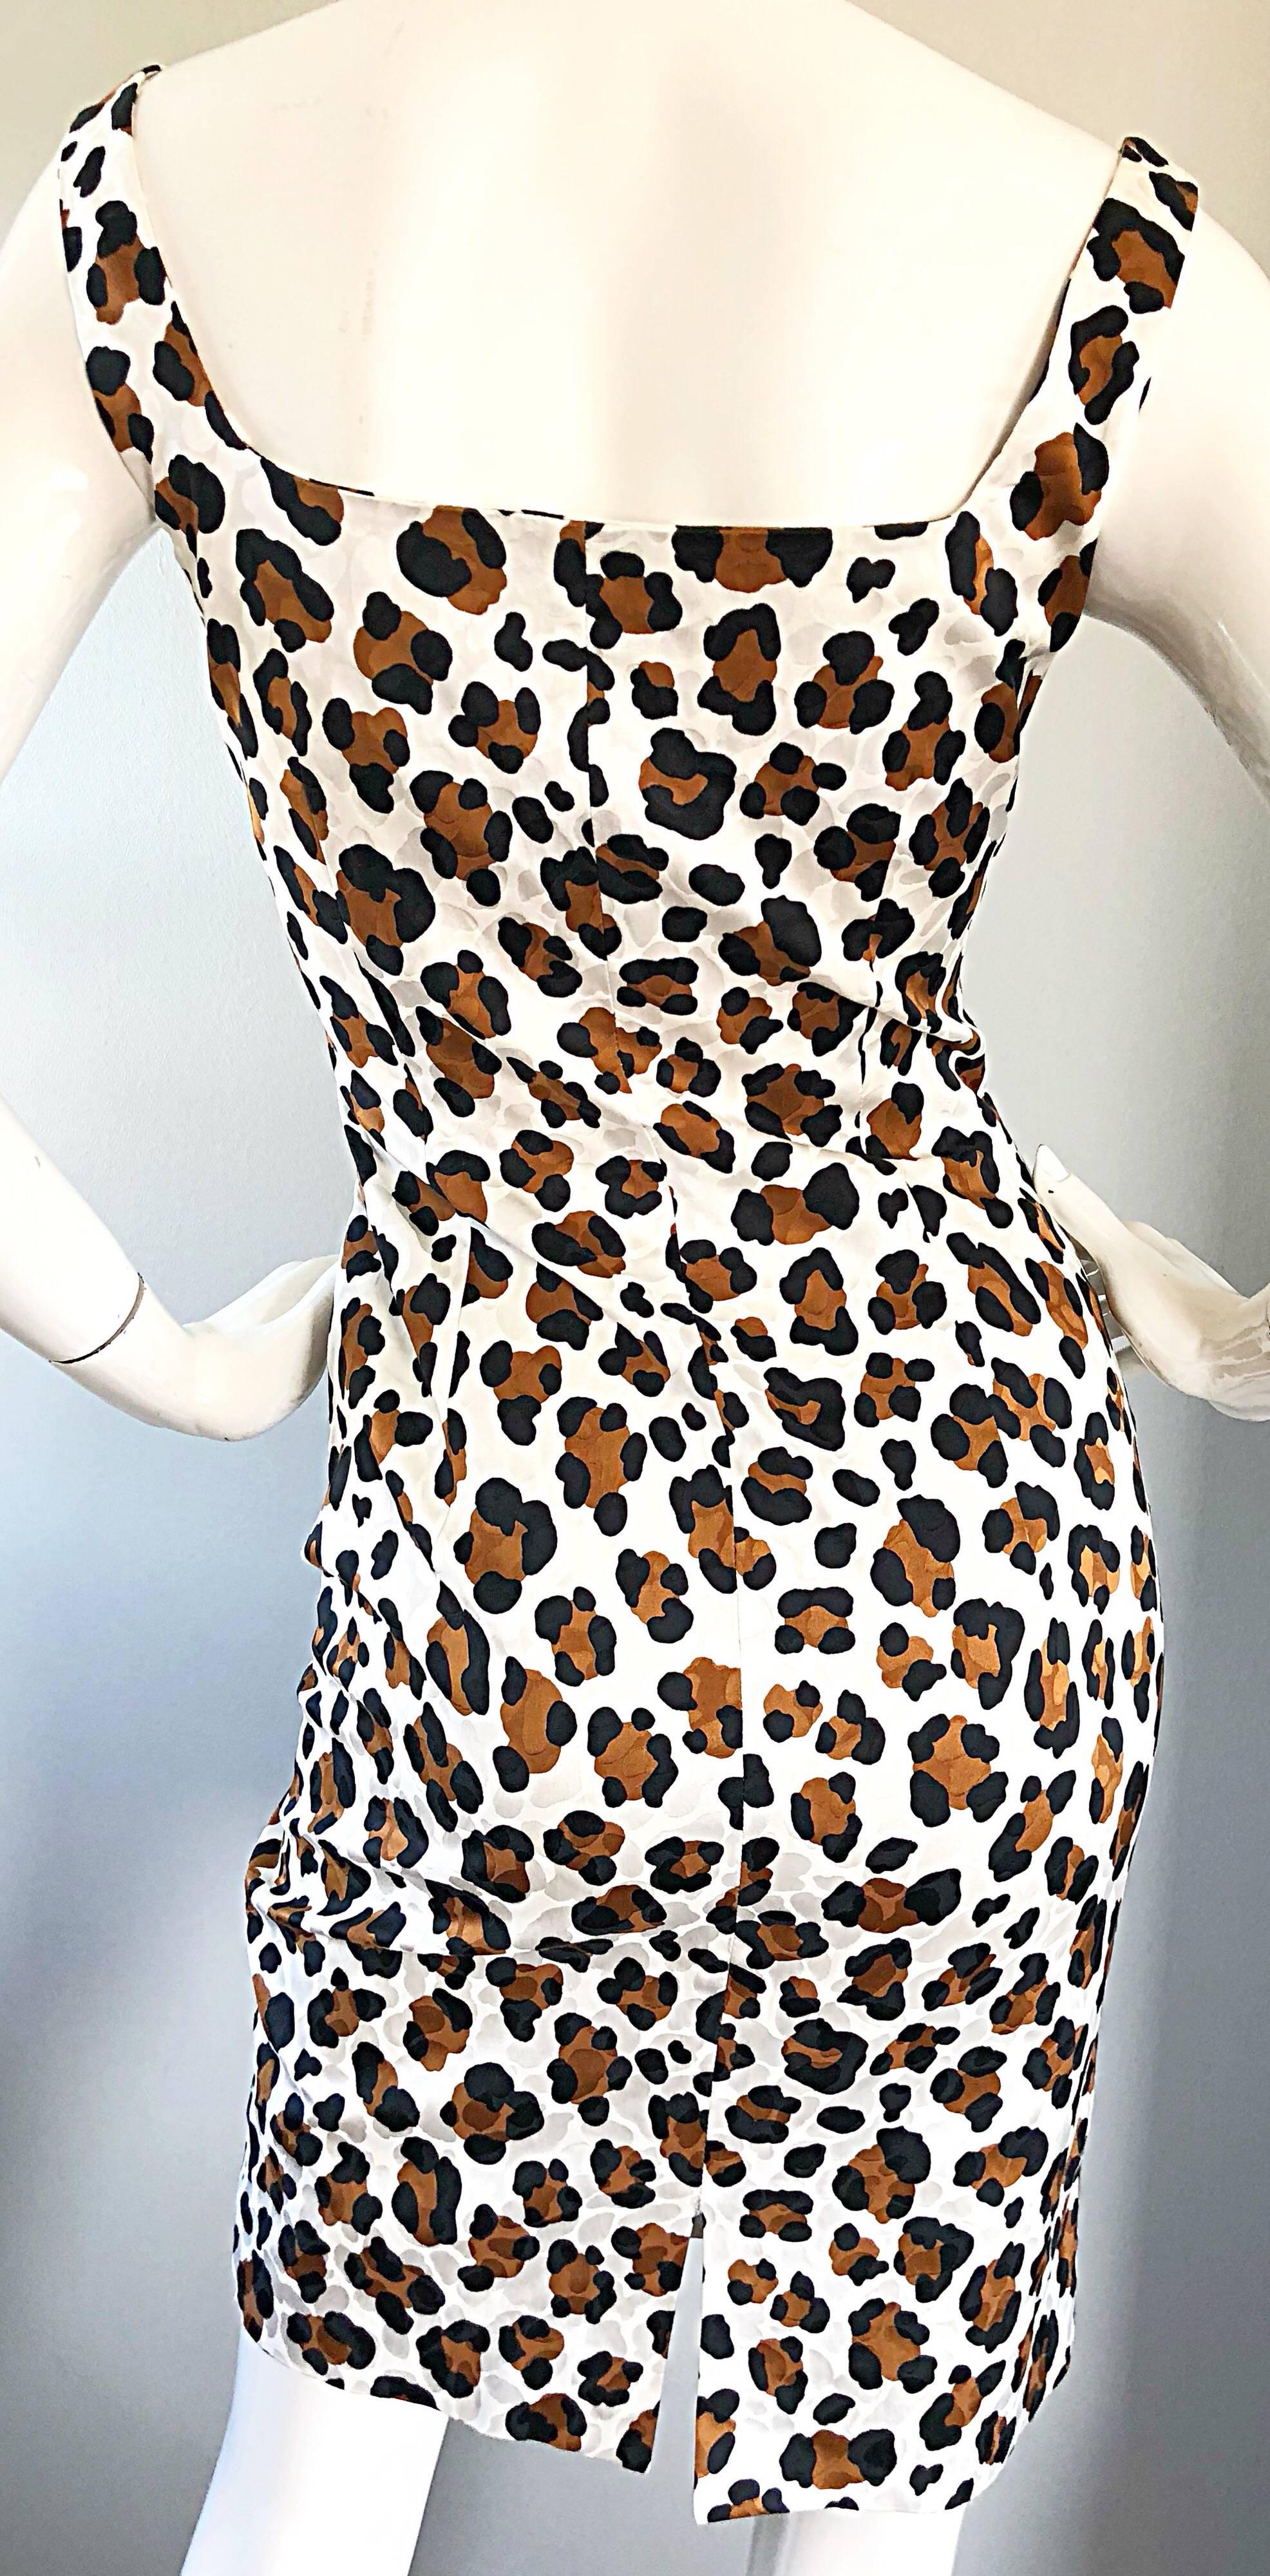 Michael Kors Collection Size 8 White Cheetah Leopard Print Early 2000s Dress 1